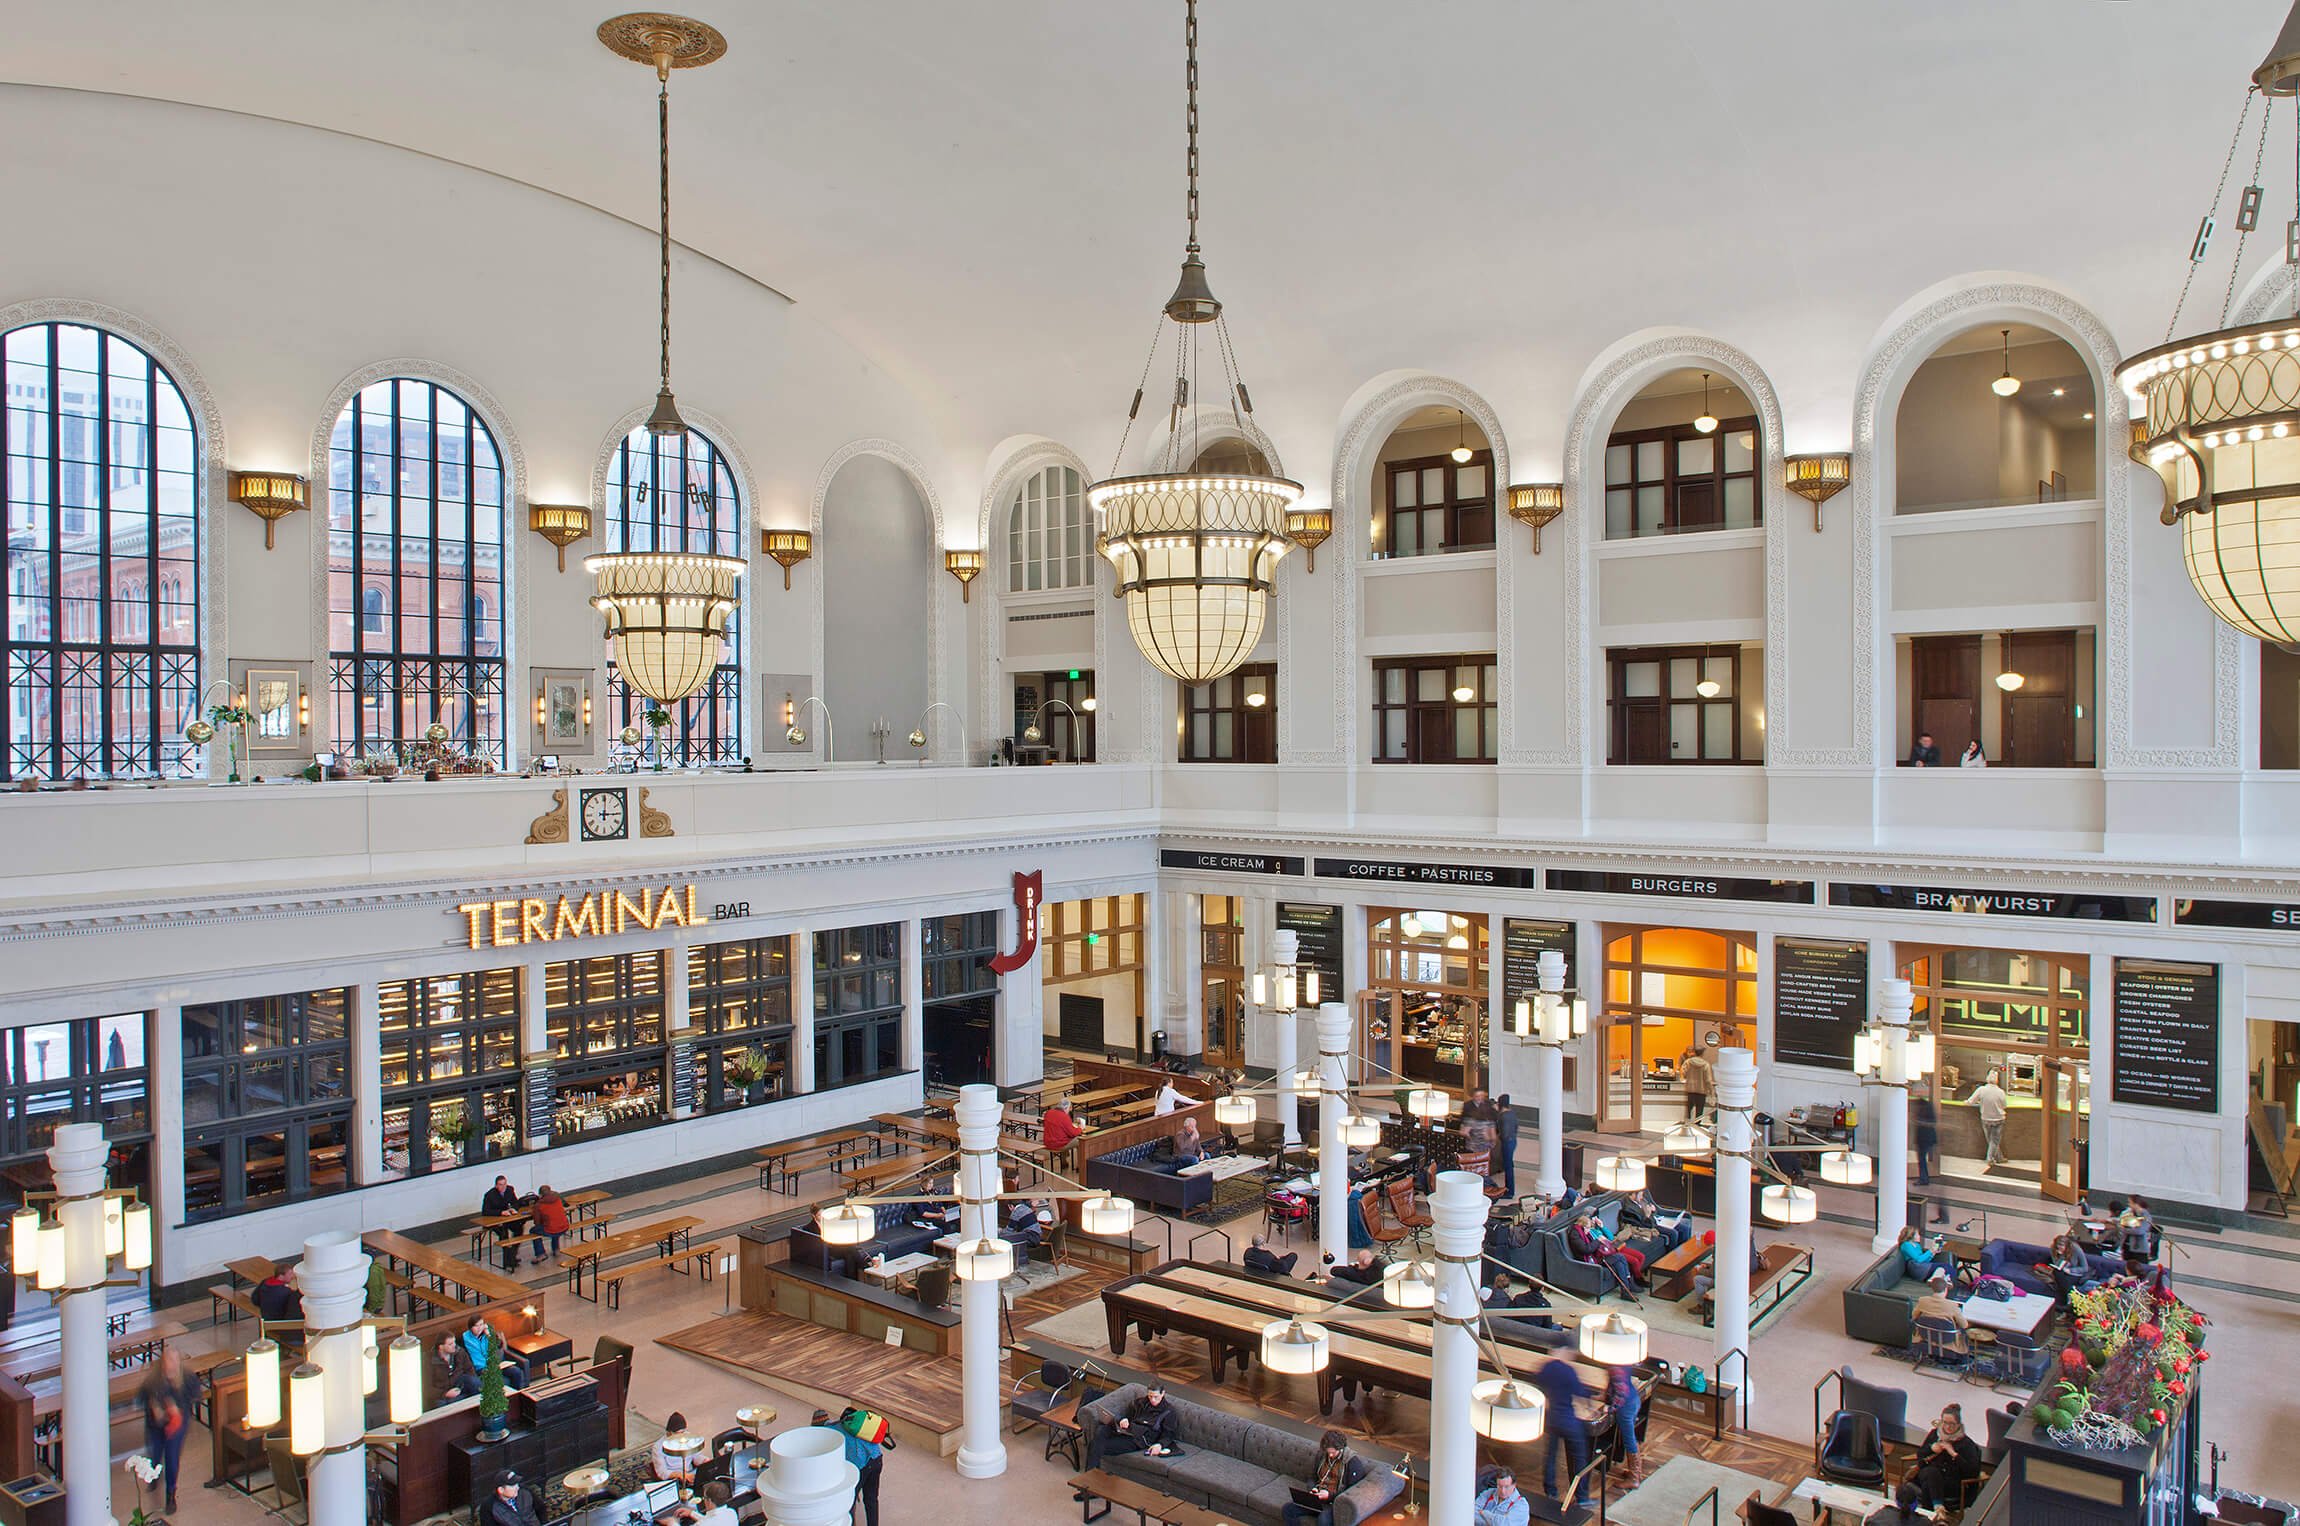 Union Station Great Hall at the Crawford Hotel in Denver, Colorado.